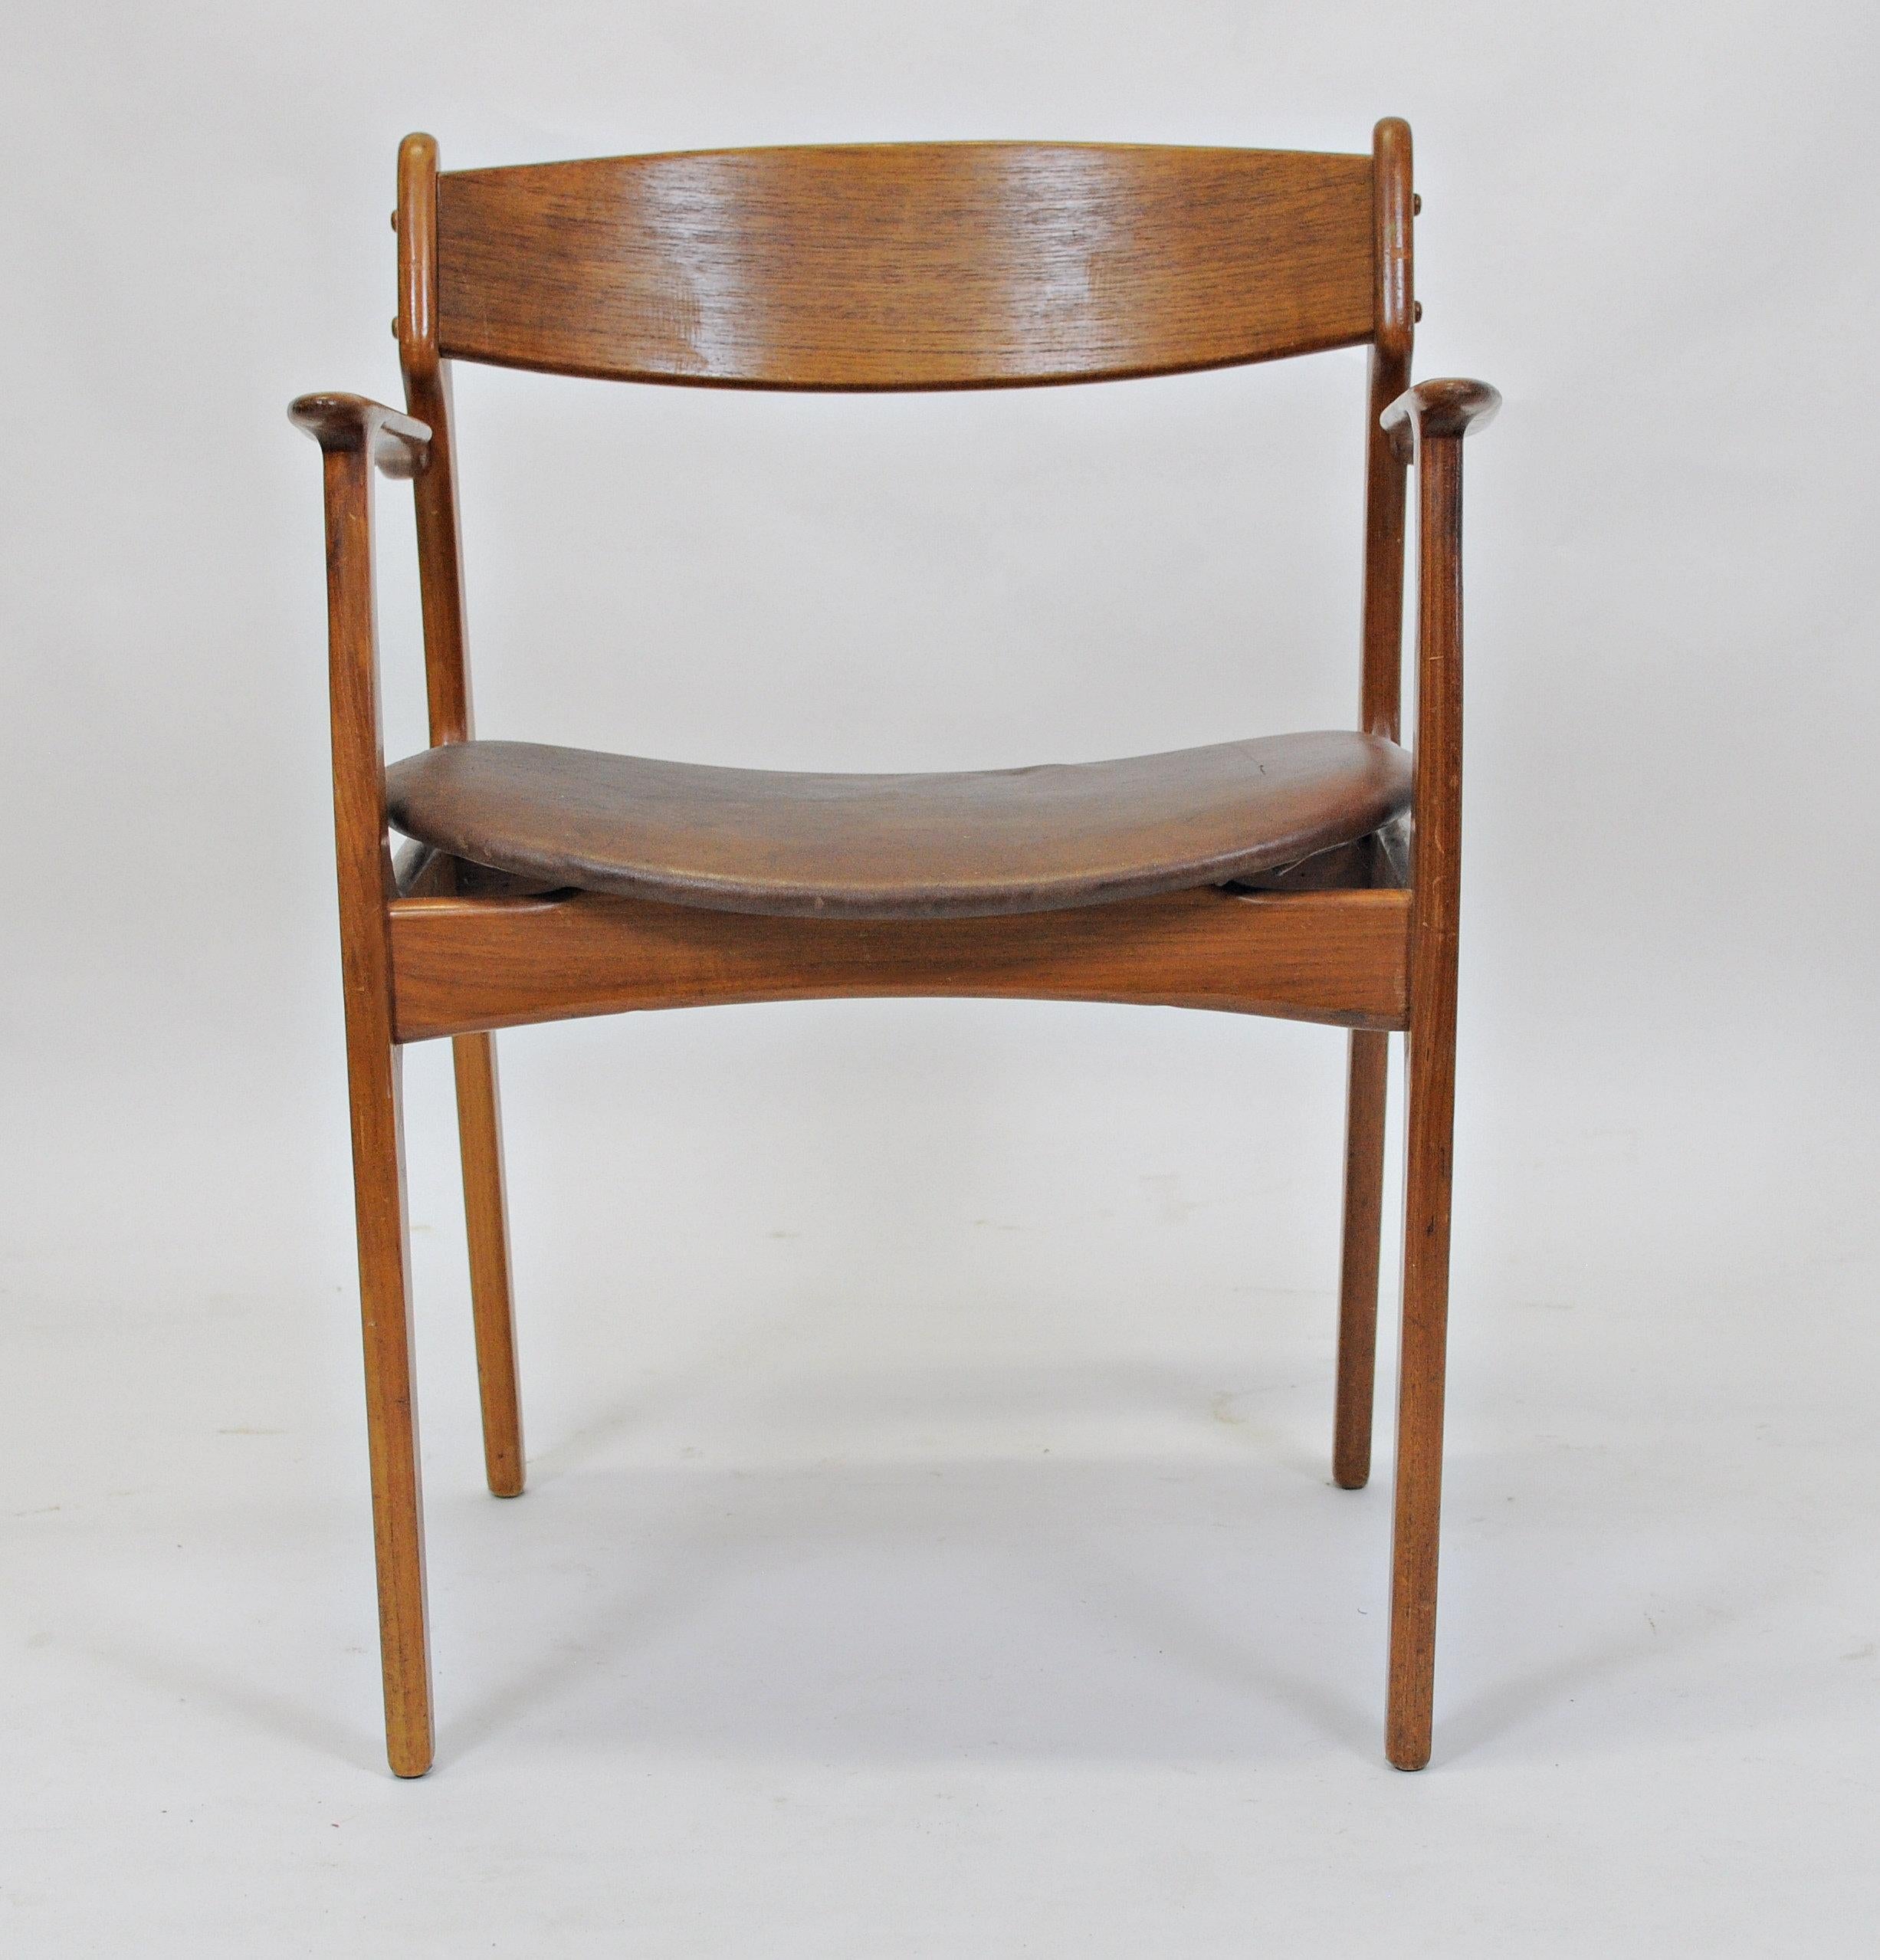 A rarely seen set of 4 Erik Buch teak armchairs with backrest in teak.

The chairs have been overlooked and refinished by our cabinetmaker to insure that they are in very good condition with only minimal signs of age and use and will be